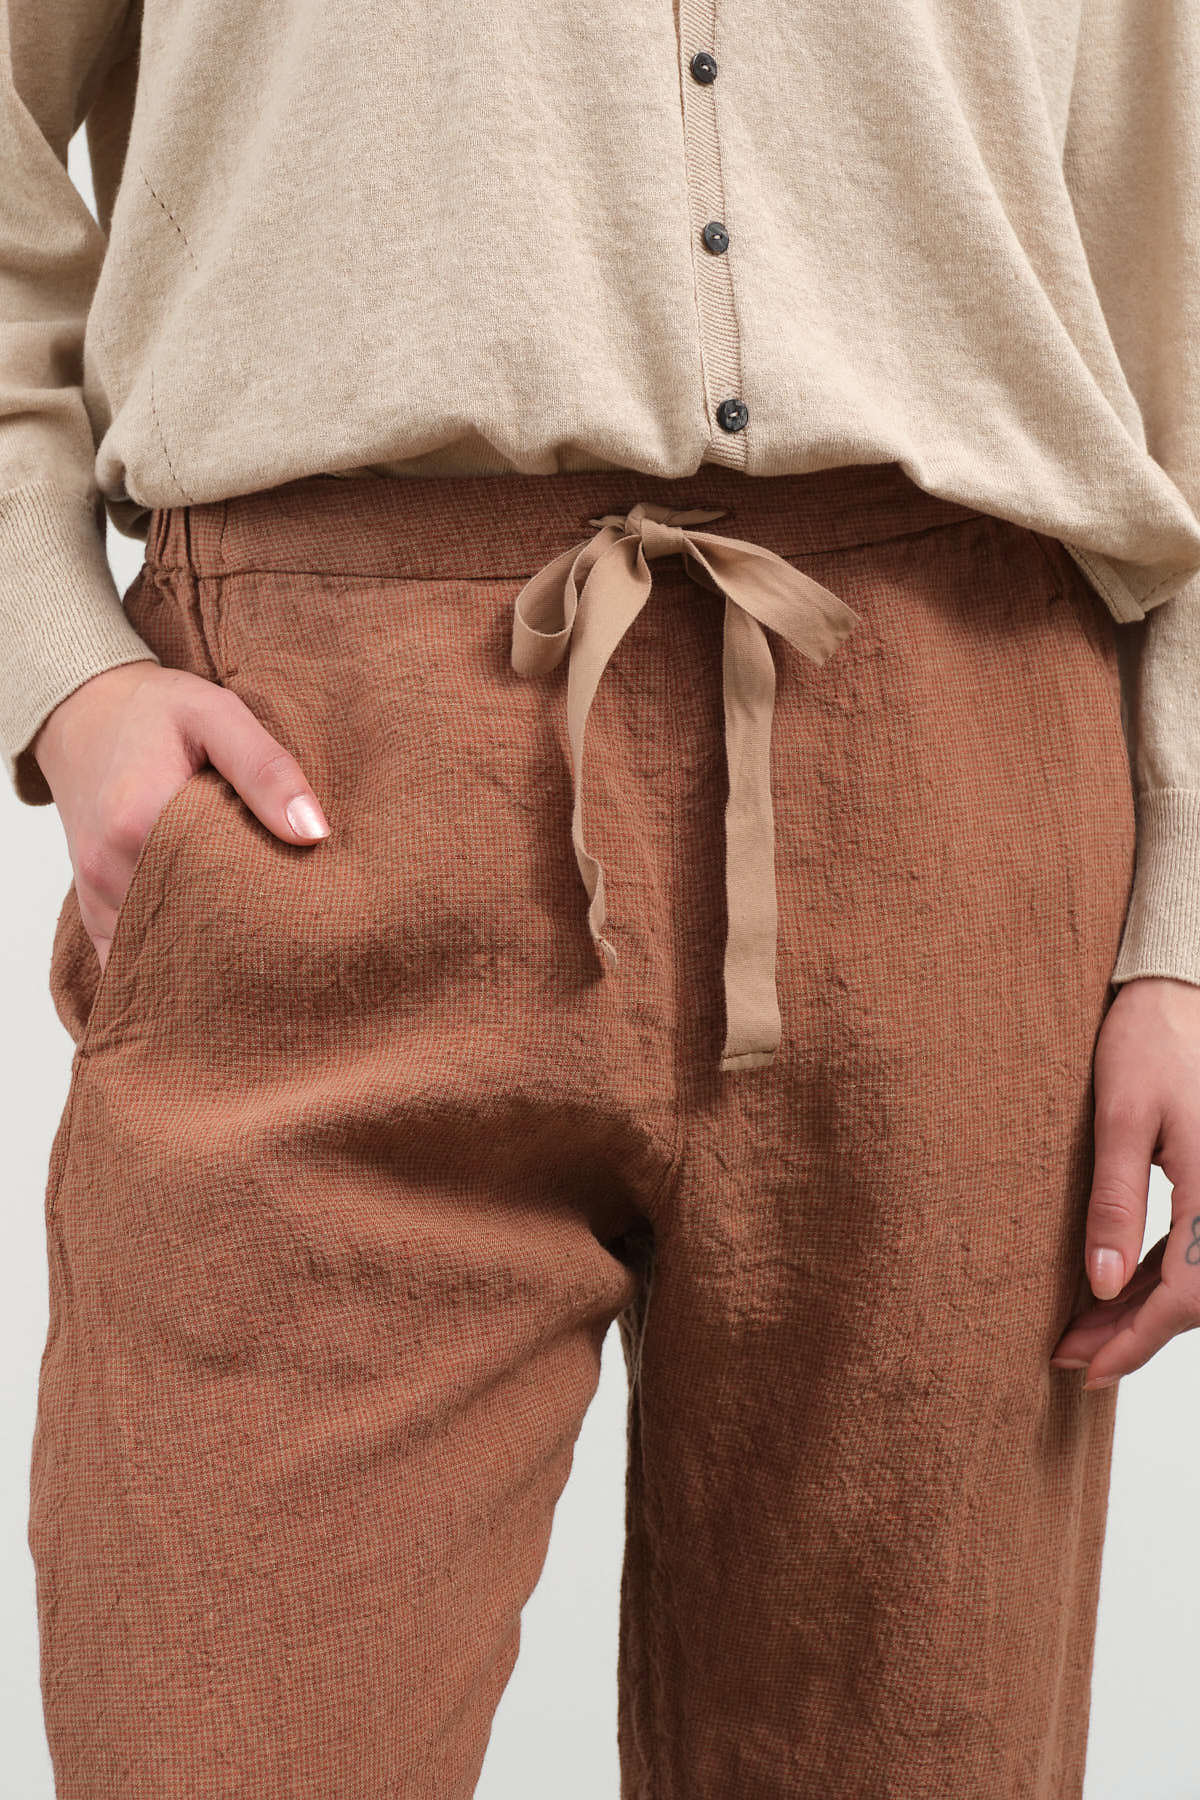 Waistband view of Houndstooth Cuffed Pants in Brick